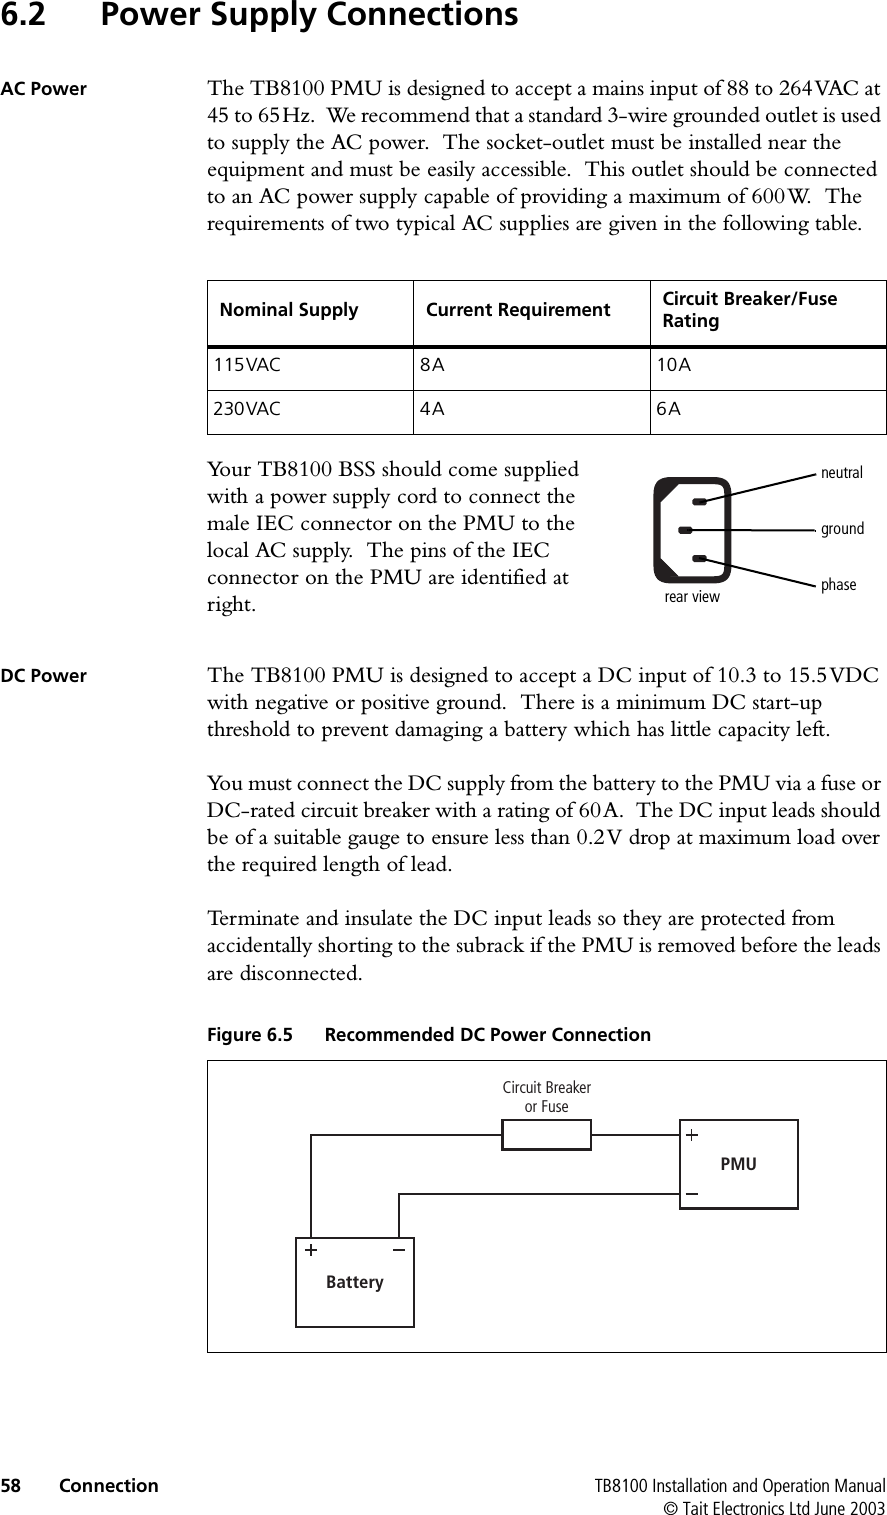  58 Connection TB8100 Installation and Operation Manual© Tait Electronics Ltd June 20036.2 Power Supply ConnectionsAC Power The TB8100 PMU is designed to accept a mains input of 88 to 264VAC at 45 to 65Hz.  We recommend that a standard 3-wire grounded outlet is used to supply the AC power.  The socket-outlet must be installed near the equipment and must be easily accessible.  This outlet should be connected to an AC power supply capable of providing a maximum of 600W.  The requirements of two typical AC supplies are given in the following table.Your TB8100 BSS should come supplied with a power supply cord to connect the male IEC connector on the PMU to the local AC supply.  The pins of the IEC connector on the PMU are identified at right.DC Power The TB8100 PMU is designed to accept a DC input of 10.3 to 15.5VDC with negative or positive ground.  There is a minimum DC start-up threshold to prevent damaging a battery which has little capacity left.You must connect the DC supply from the battery to the PMU via a fuse or DC-rated circuit breaker with a rating of 60A.  The DC input leads should be of a suitable gauge to ensure less than 0.2V drop at maximum load over the required length of lead.  Terminate and insulate the DC input leads so they are protected from accidentally shorting to the subrack if the PMU is removed before the leads are disconnected.Nominal Supply Current Requirement Circuit Breaker/Fuse Rating115VAC 8A 10A230VAC 4A 6Aphaseneutralgroundrear viewFigure 6.5 Recommended DC Power ConnectionBatteryPMUCircuit Breakeror Fuse